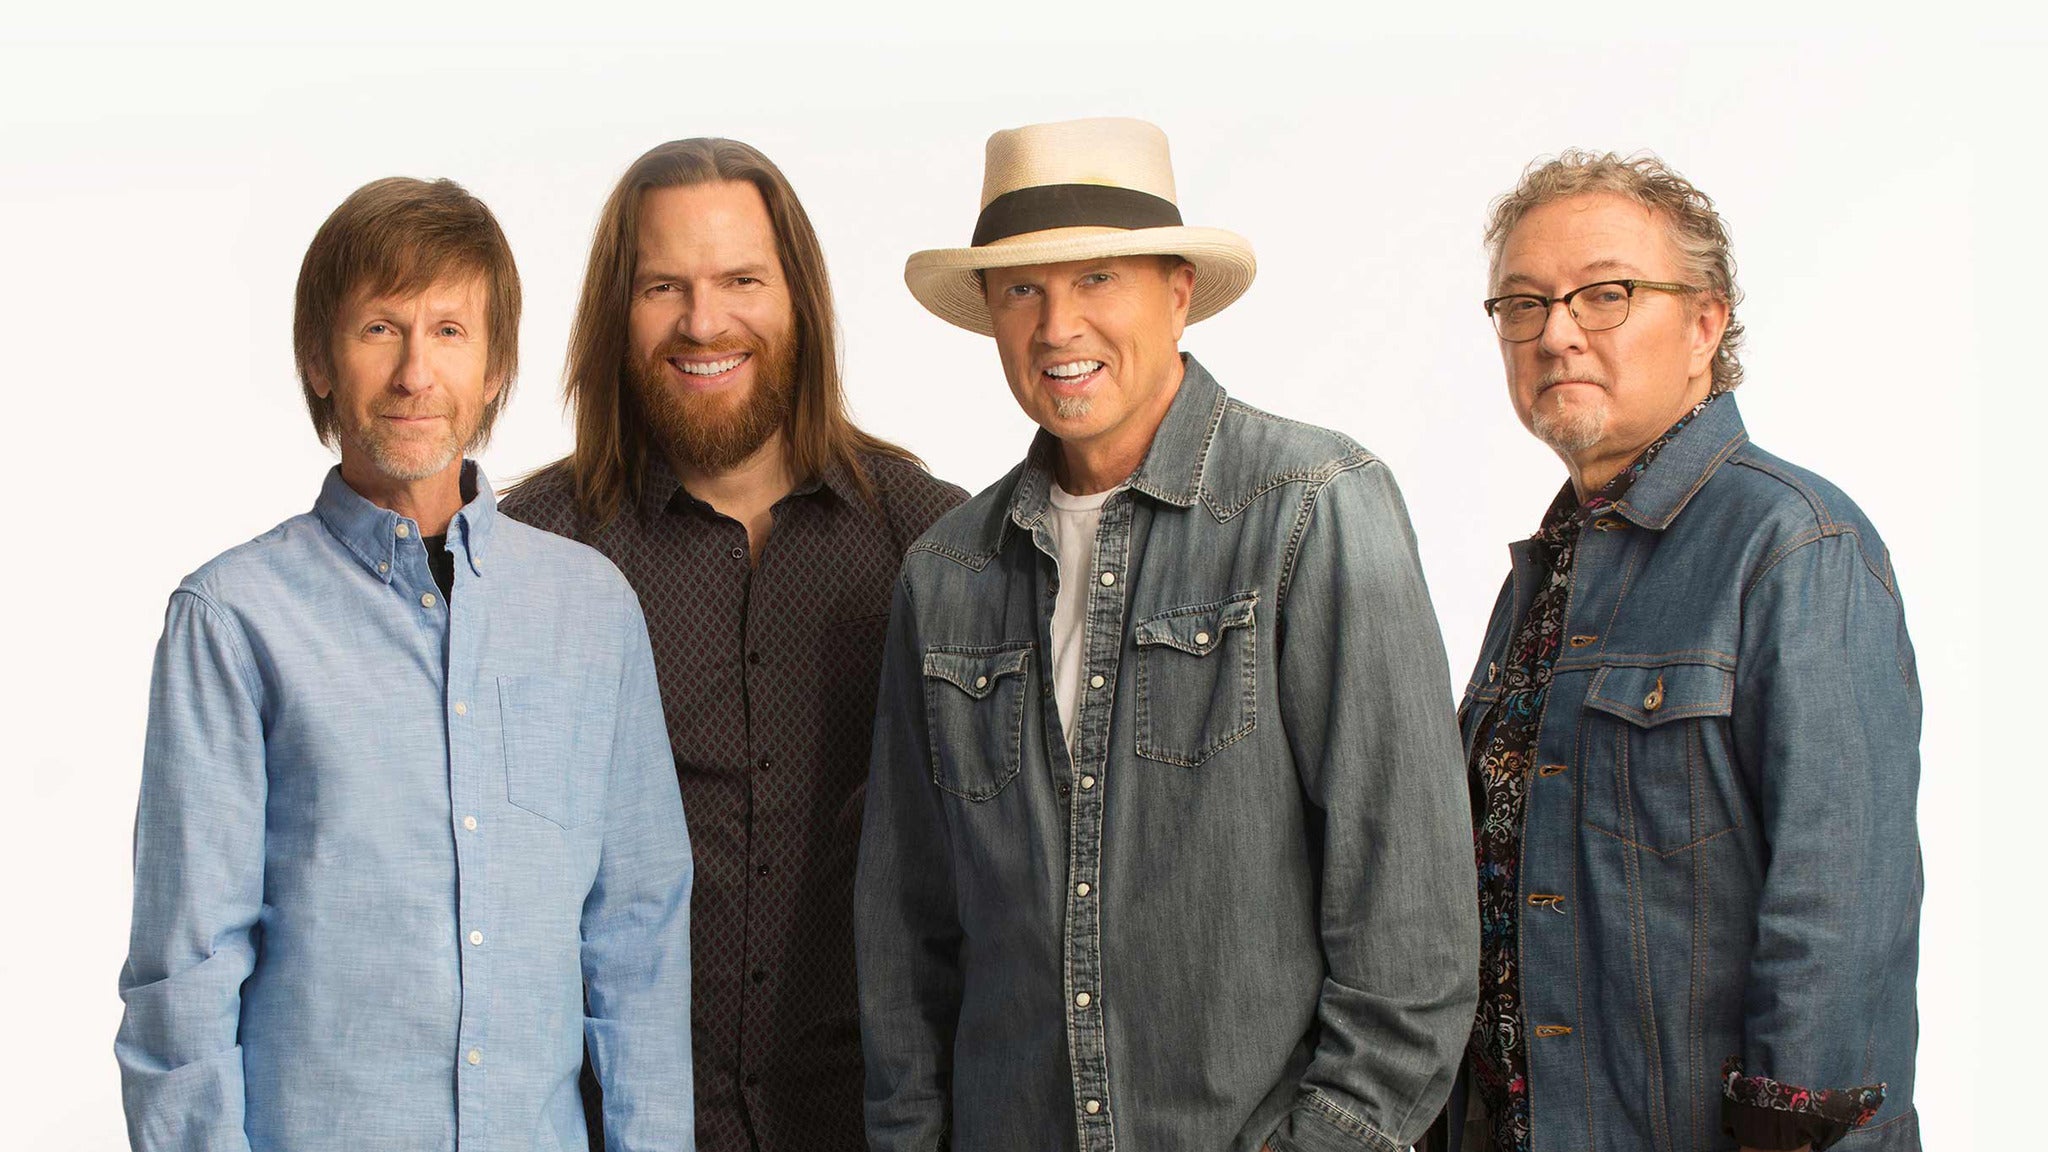 Sawyer Brown at Grizzly Rose - Denver, CO 80216